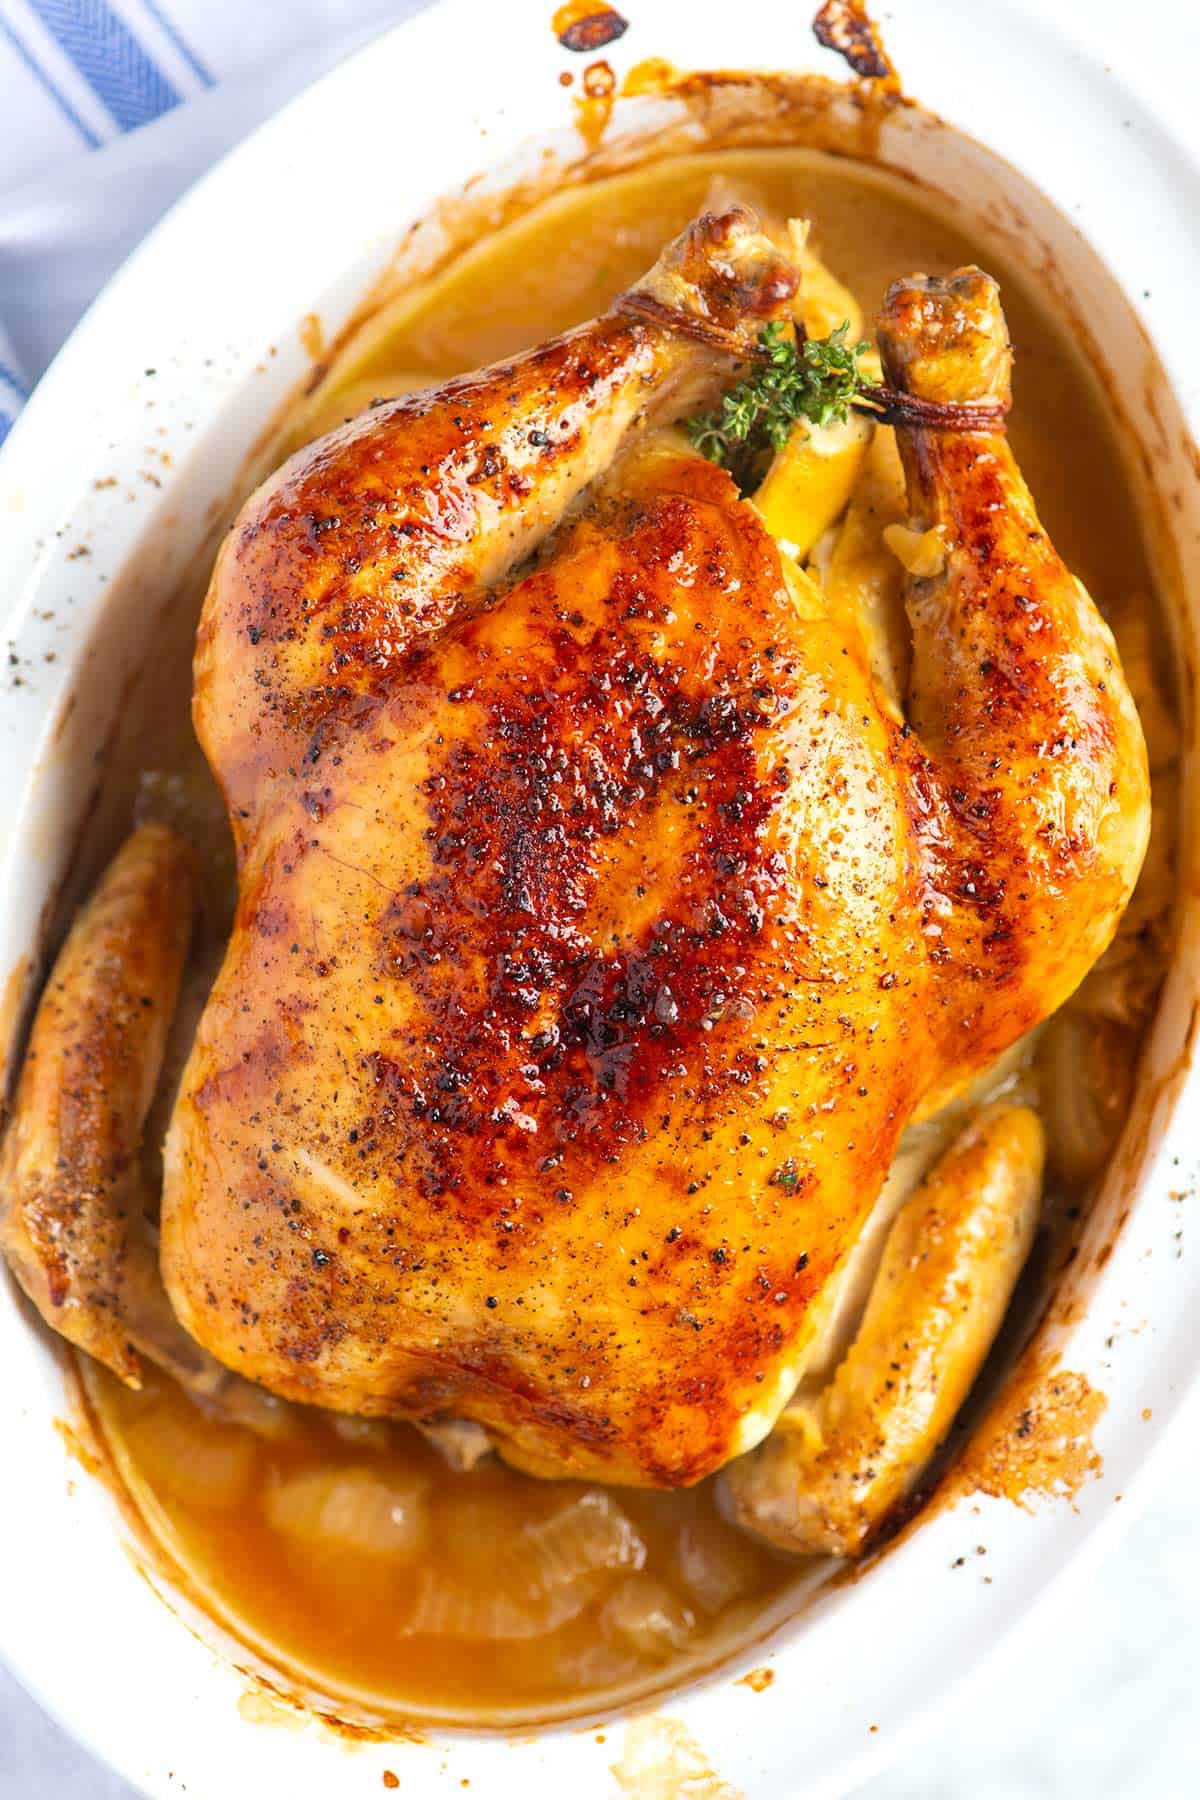 Simple Whole Roasted Chicken with Lemon - The Secret Saucer